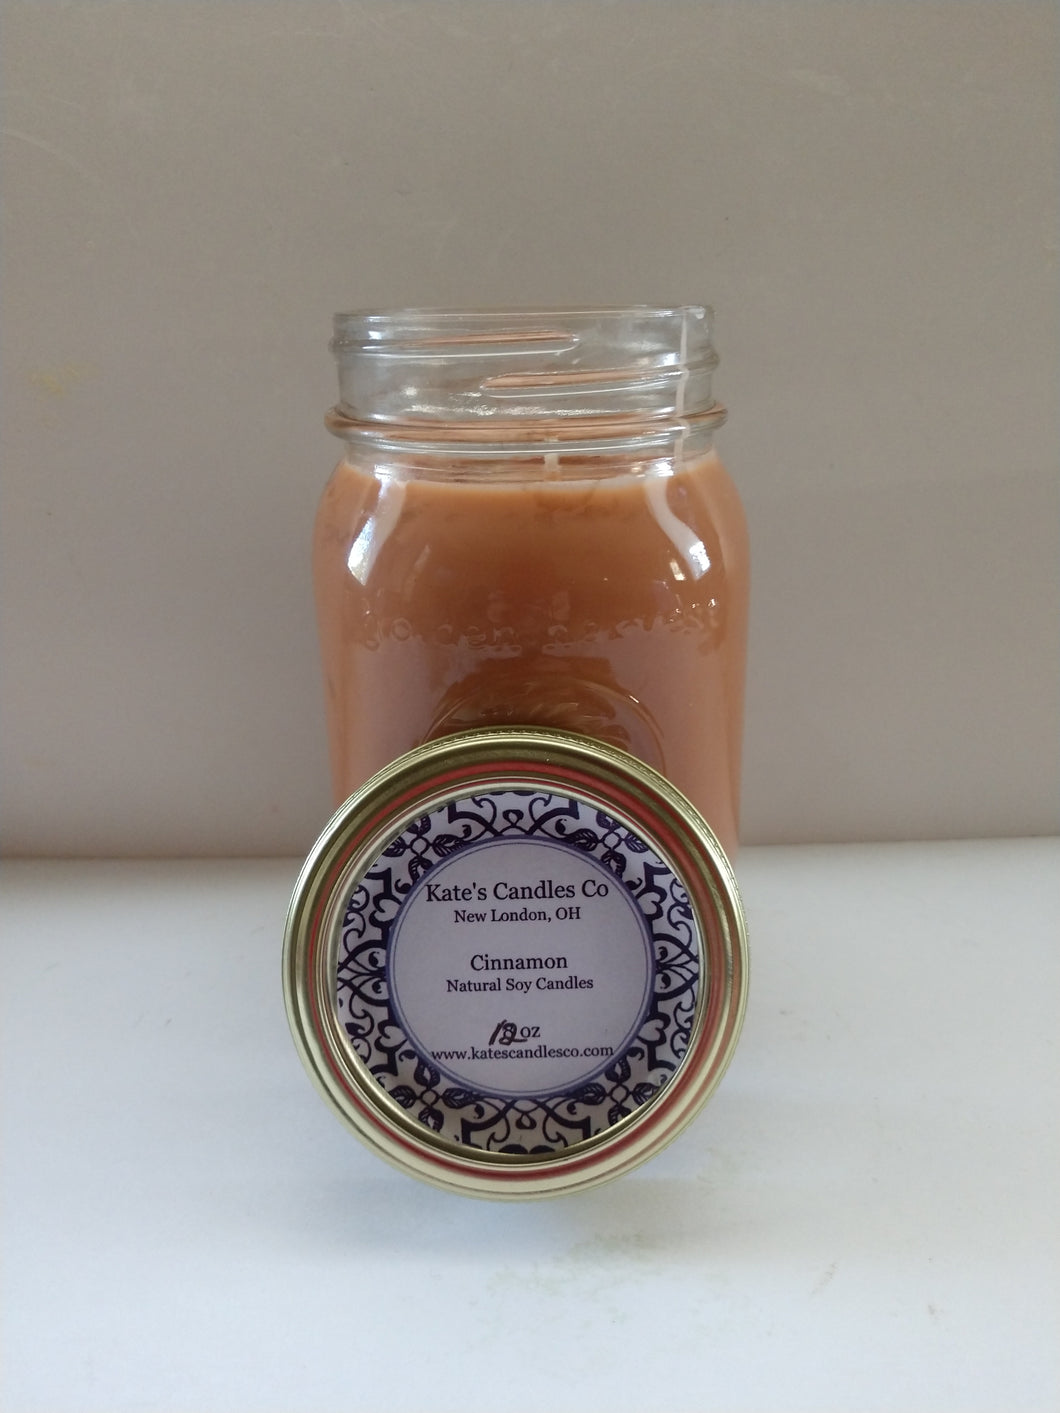 Cinnamon Scented Soy Candles - Kate's Candles Co. Soy Candles